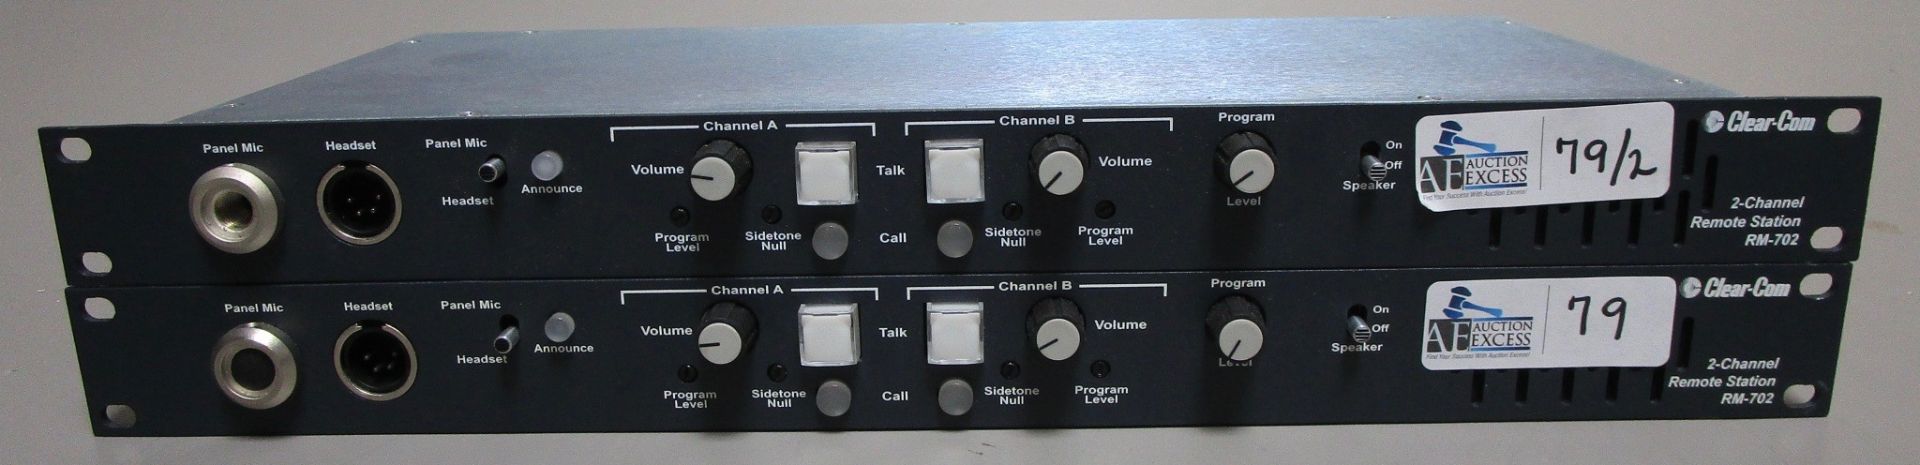 LOT OF 2 CLEAR COMM ELECTRONICS RM-702 2 CHANNEL REMOTE INTERCOM STATIONS